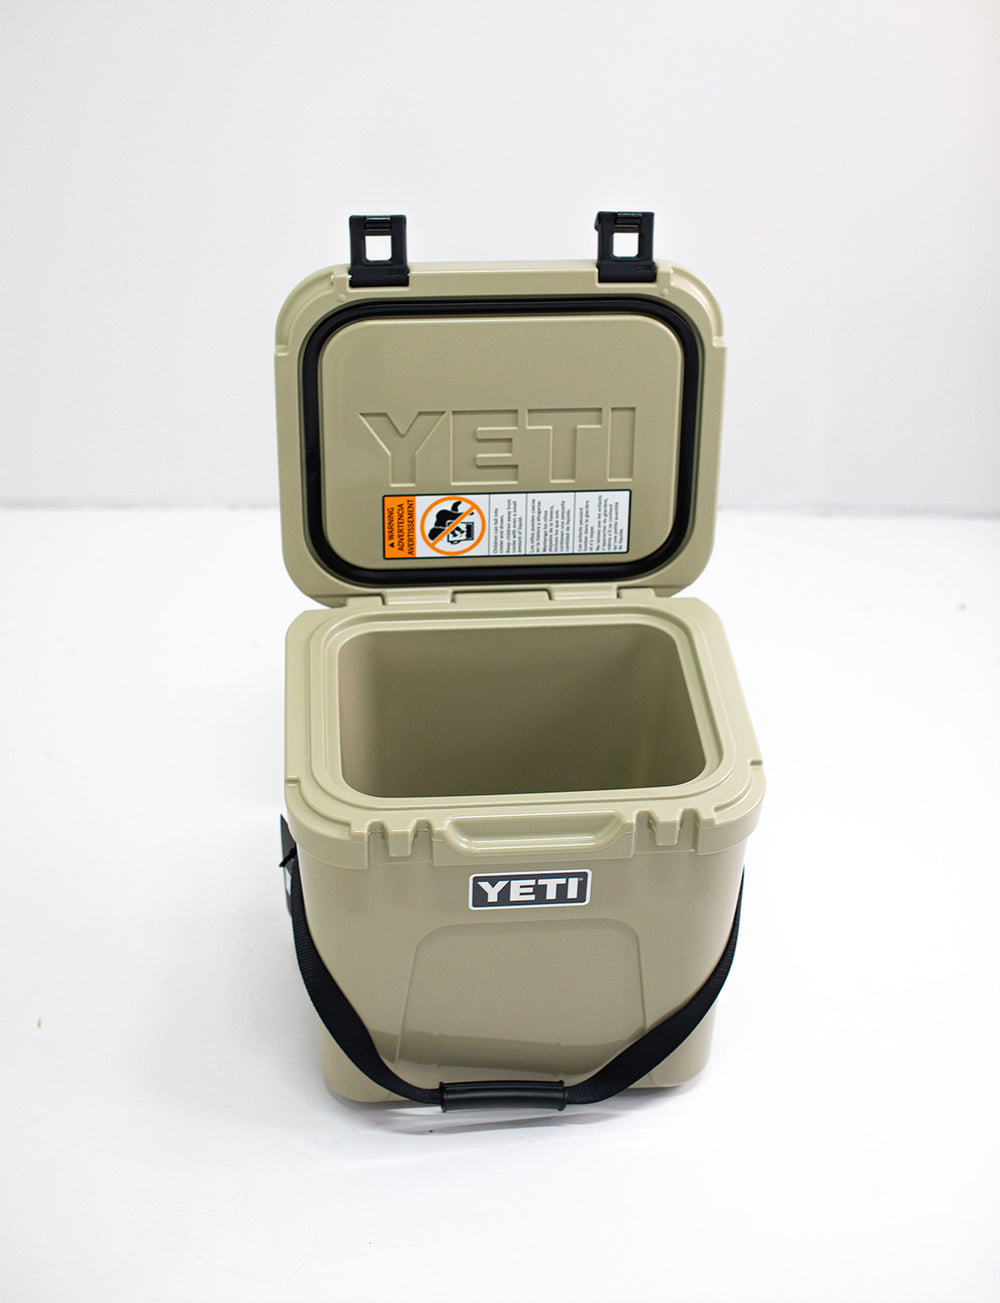 YETI Roadie 60  High Country Outfitters